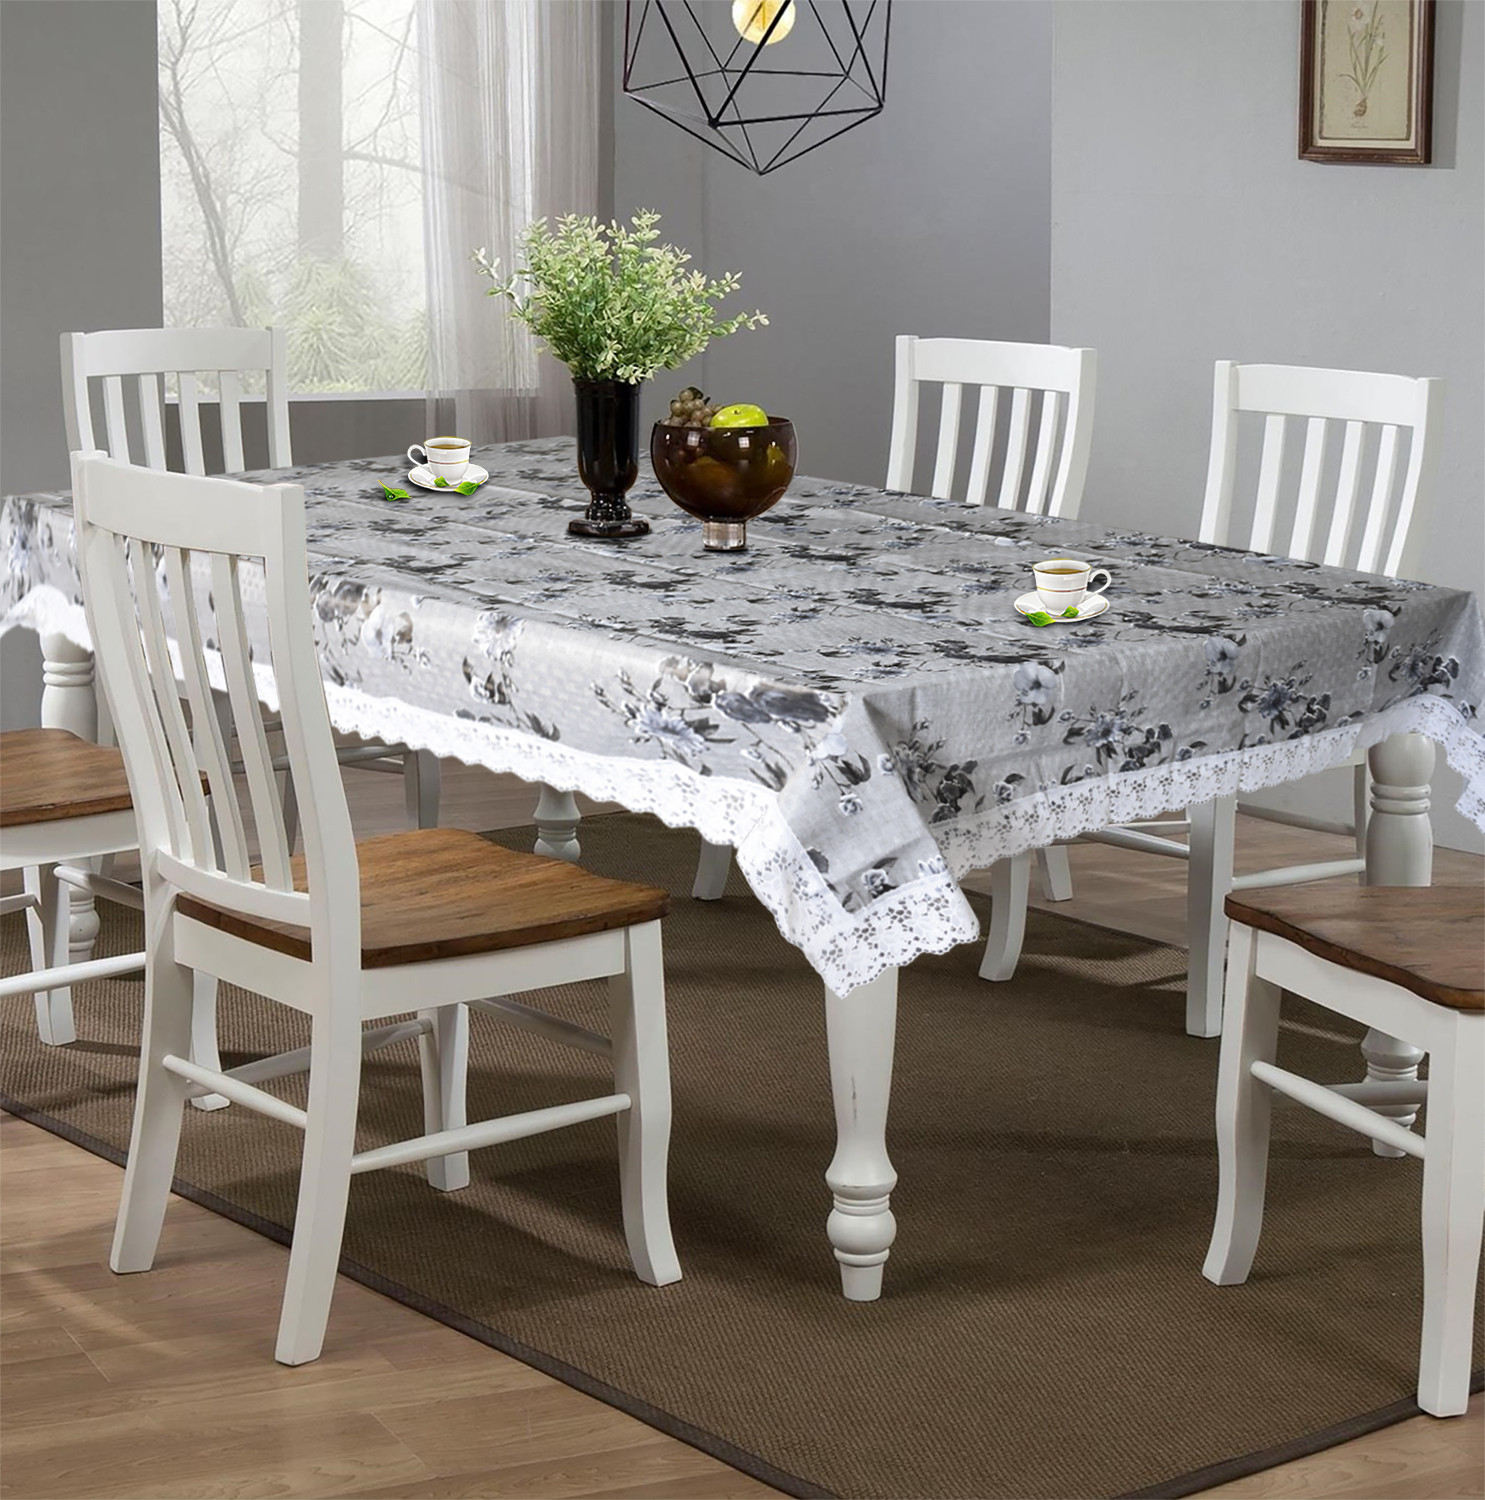 Kuber Industries Flower Printed PVC 6 Seater Dinning Table Cover, Protector With White Lace Border, 60